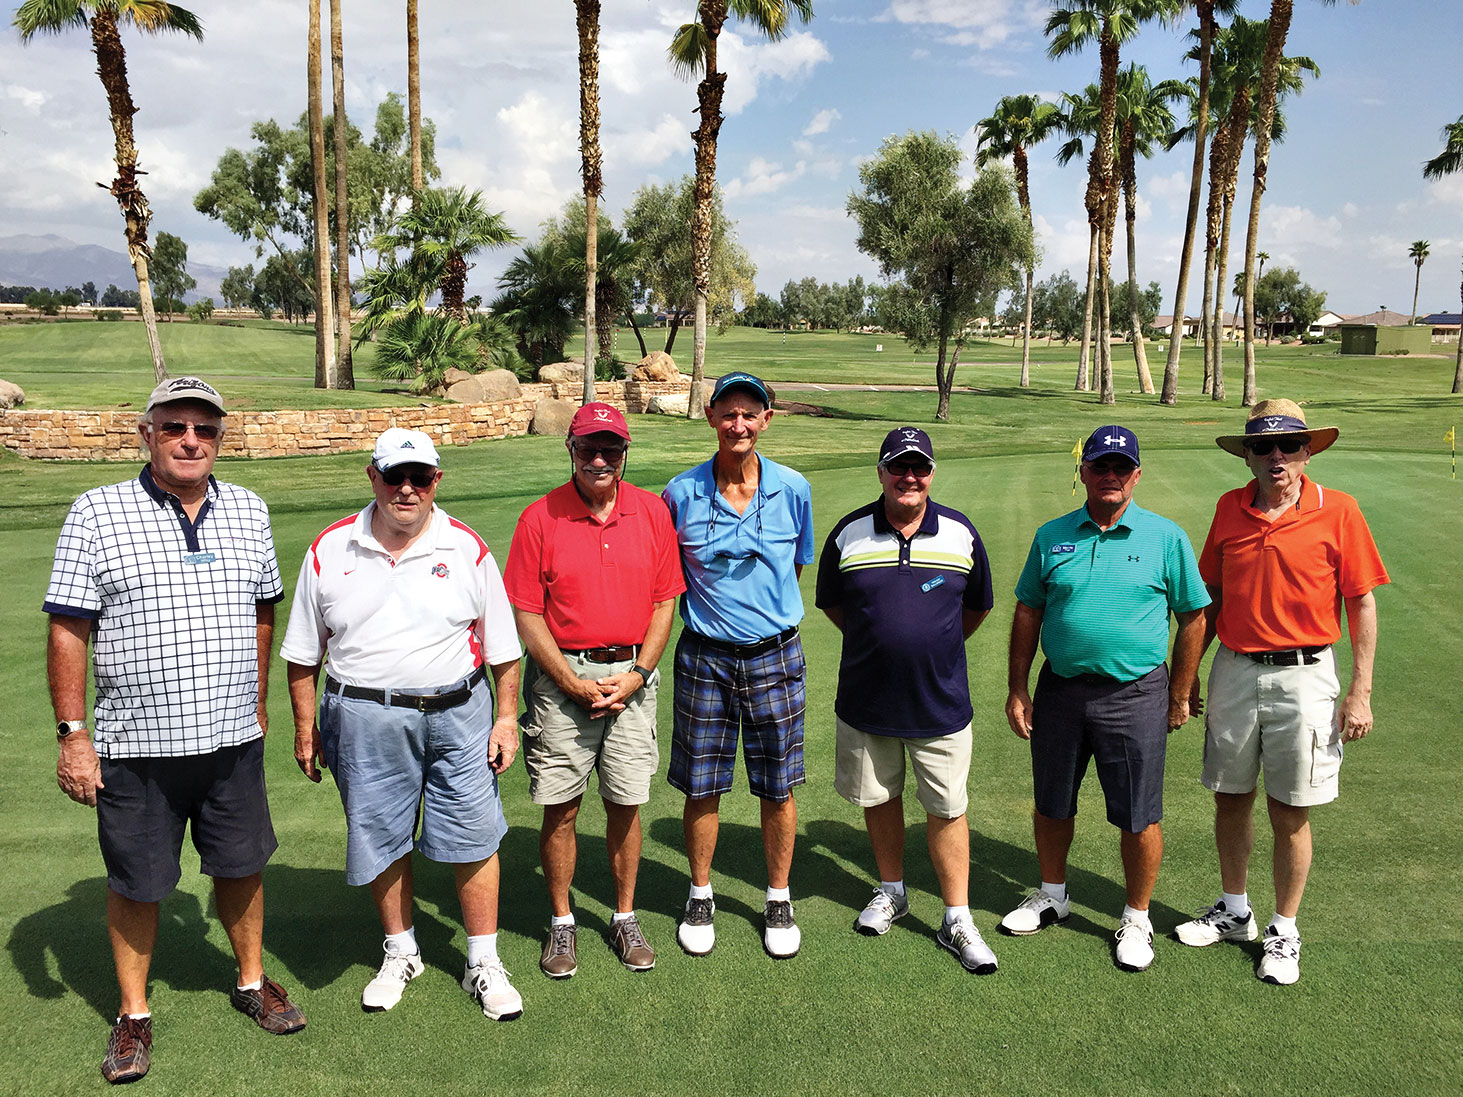 Winning Teams – August 11 Cha Cha Cha Tournament, left to right: Charlie Wiley, Jed Weisman, Clay Troxell, Rick Goodman, Trevor Ballinger, Monte Page and Rob Risden; not in photo, Dave Kennedy, N. Wisser, H. Franzone, Ron Svoboda, Kent Chu and Joe Belonax